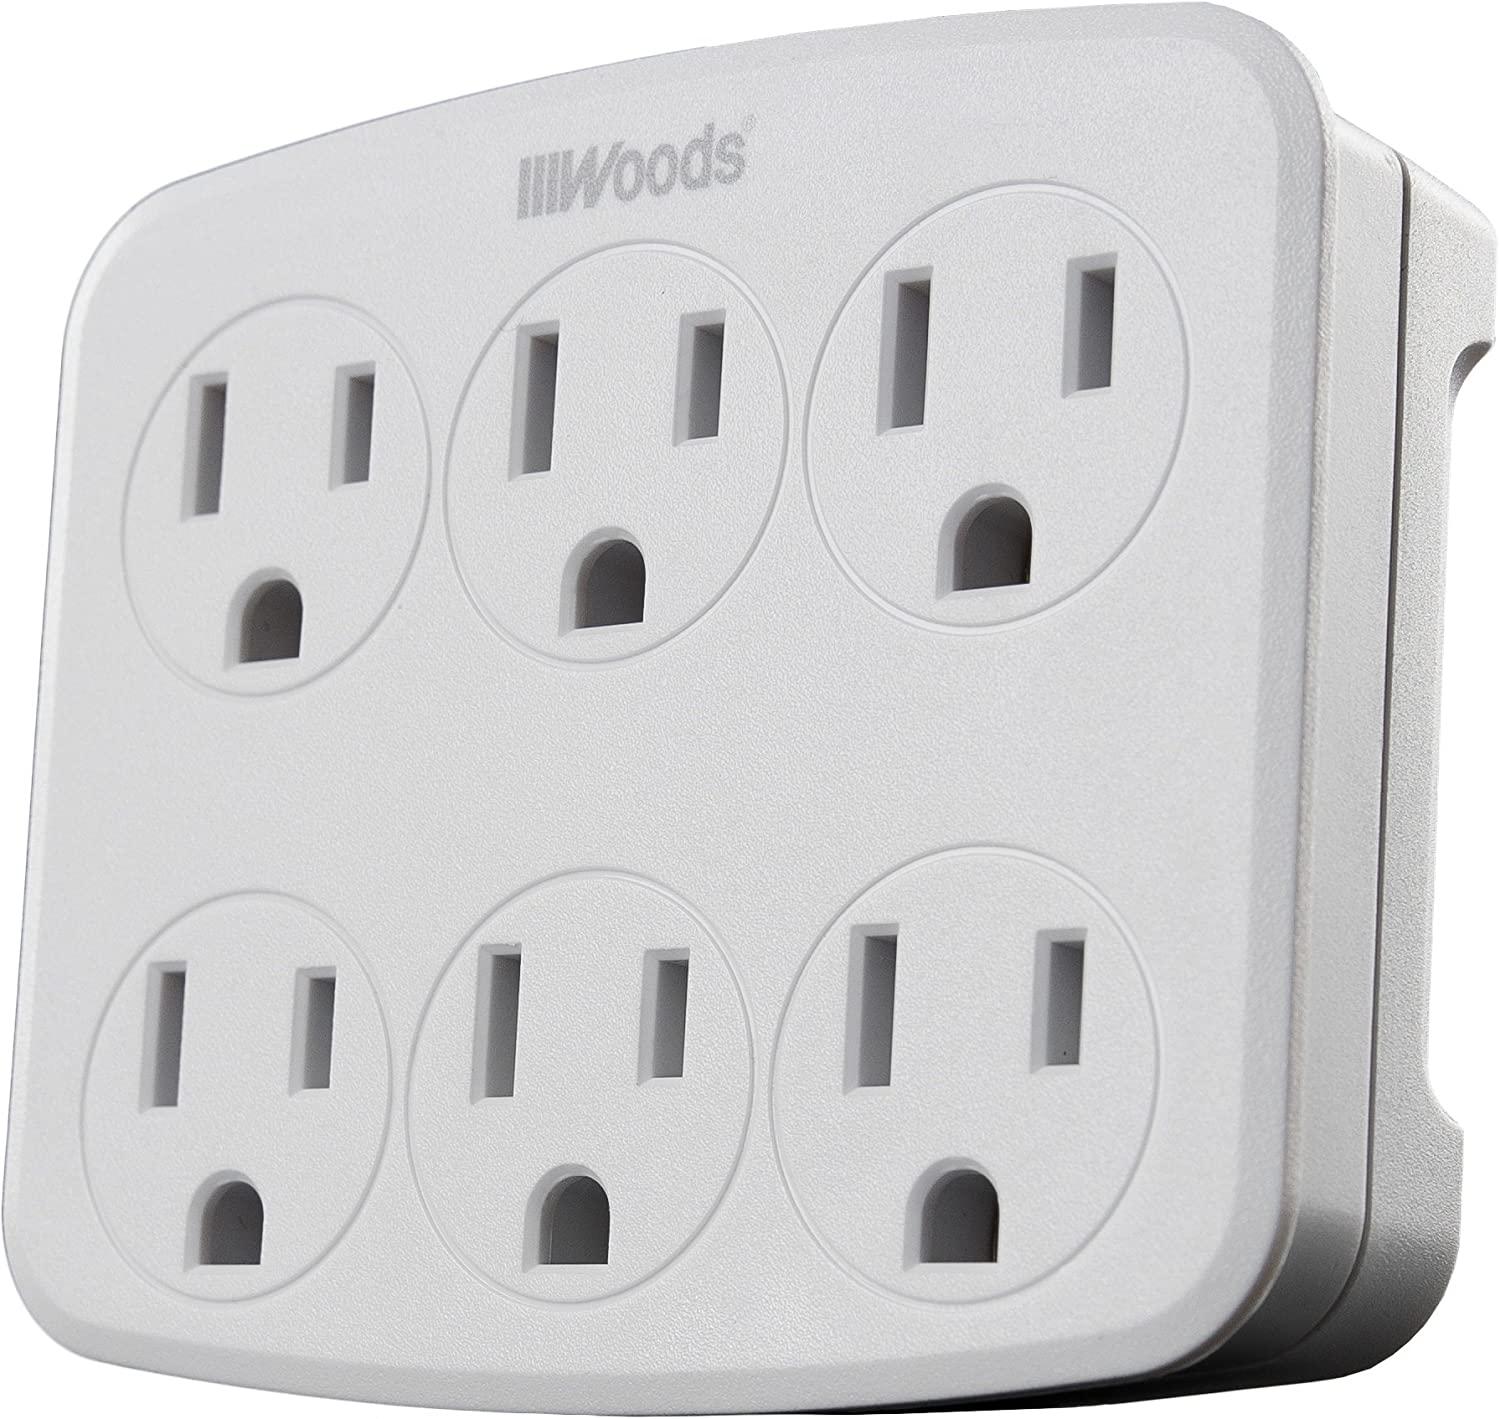 Woods 6-Outlet Wall Tap Adapter with Phone Cradle for $3.23